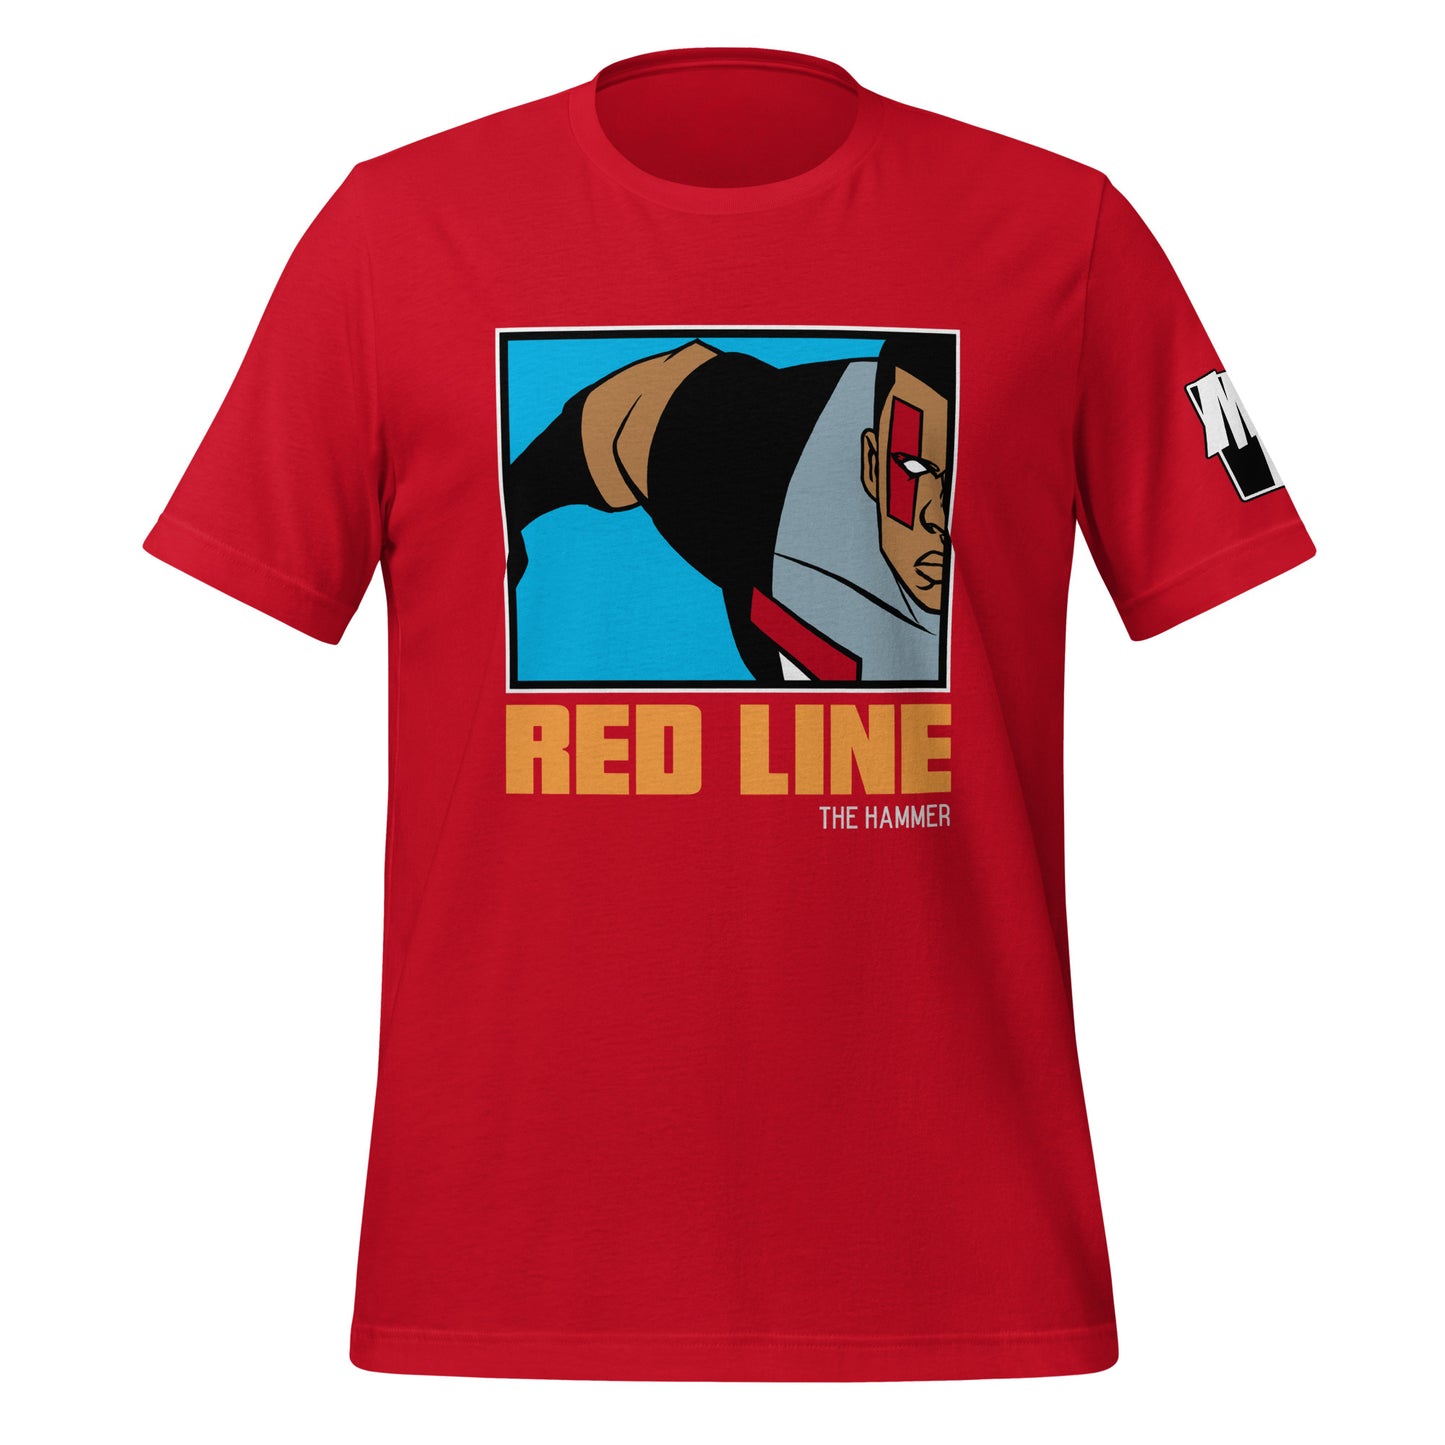 RED LINE (THE HAMMER) T-Shirt